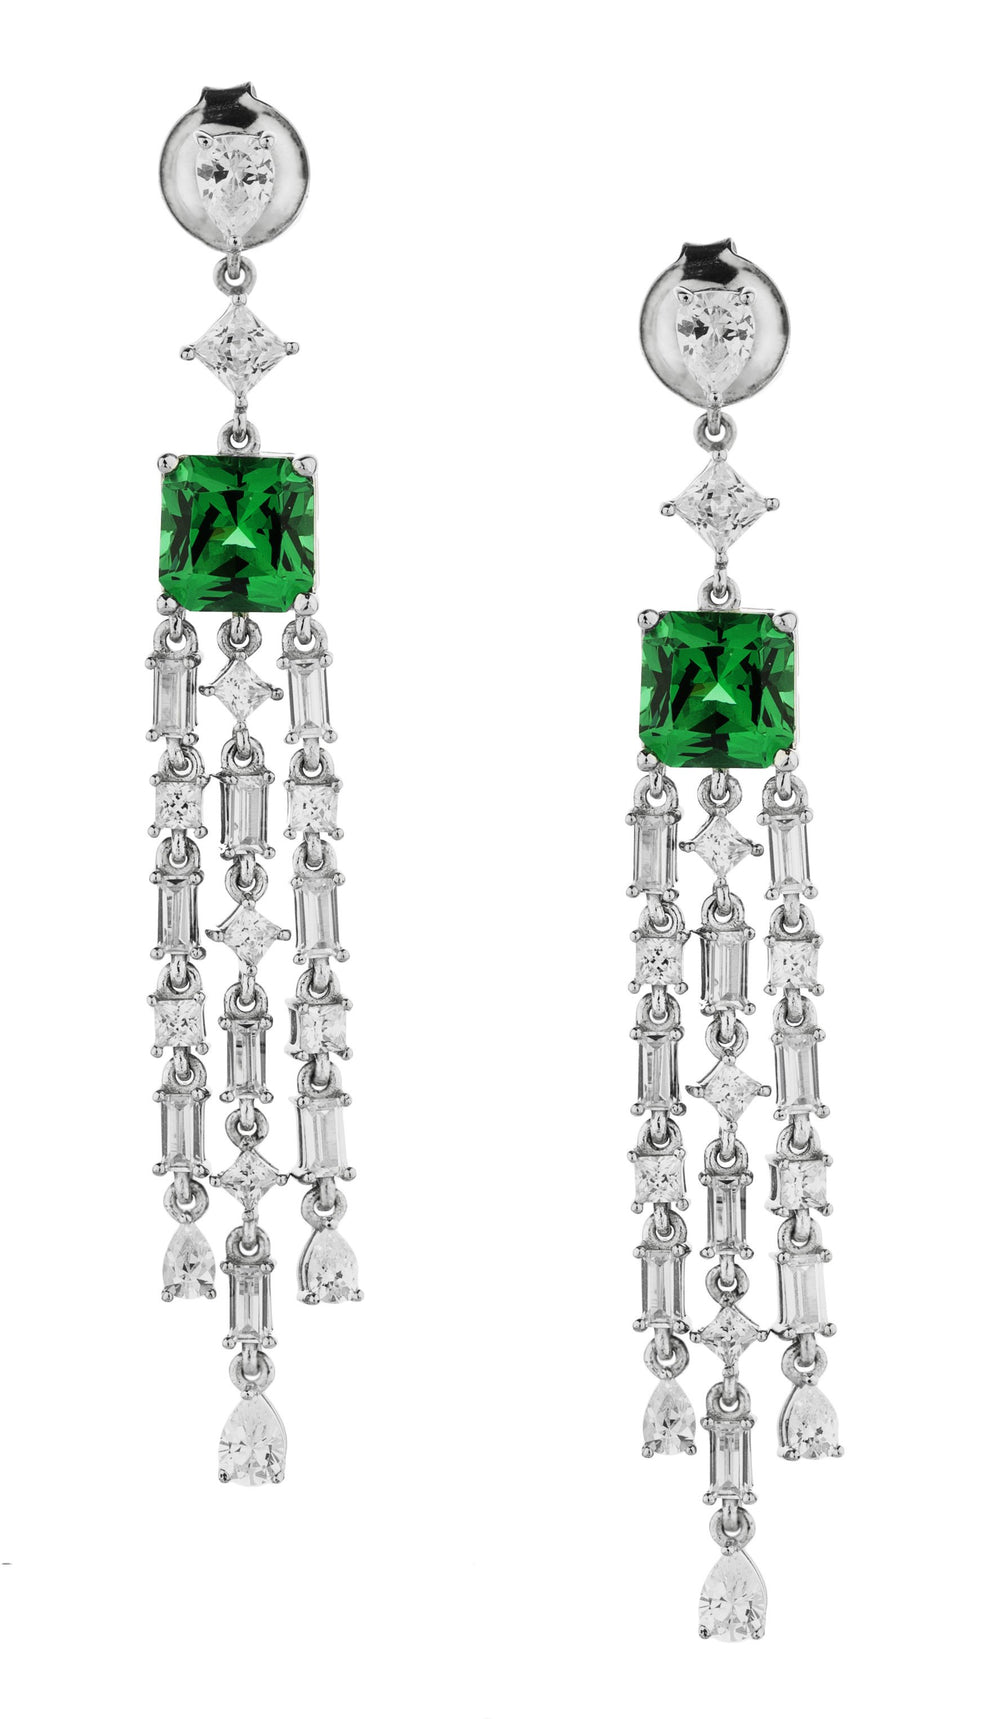 Princess Cut, Pear and Baguette drop earrings with emerald simulants and 5.44 carats* of diamond simulants in sterling silver